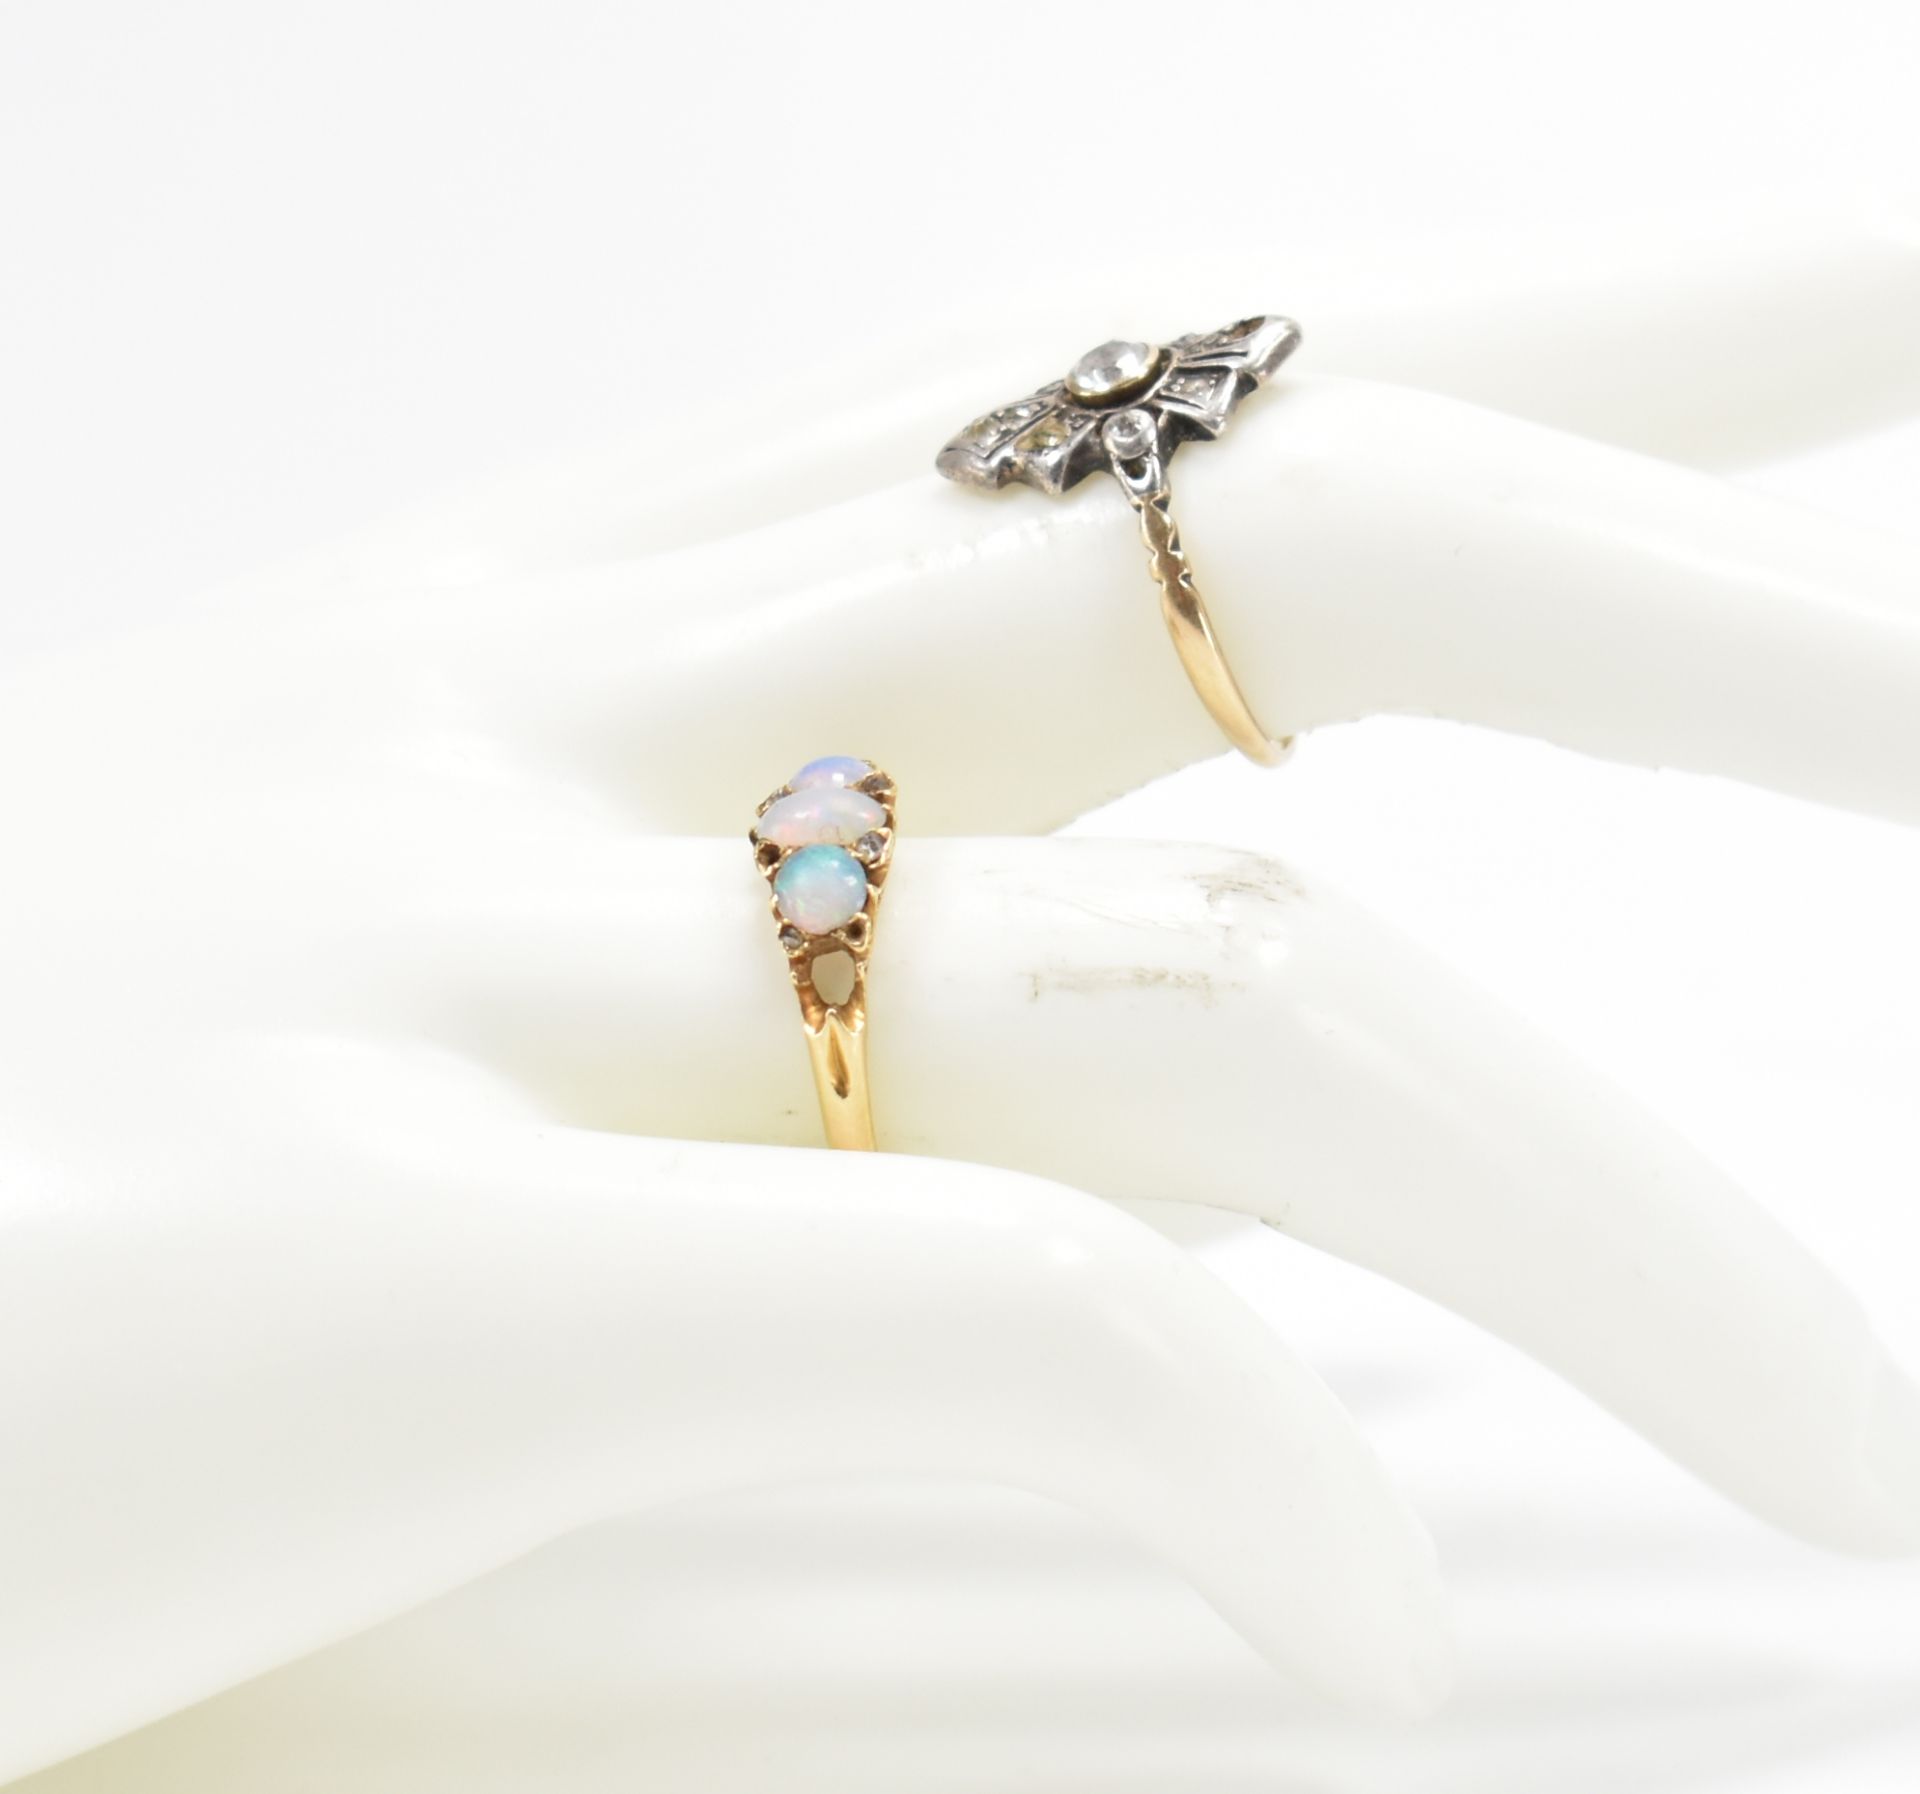 TWO ANTIQUE GOLD RINGS - OPAL & PANEL RING - Image 5 of 5